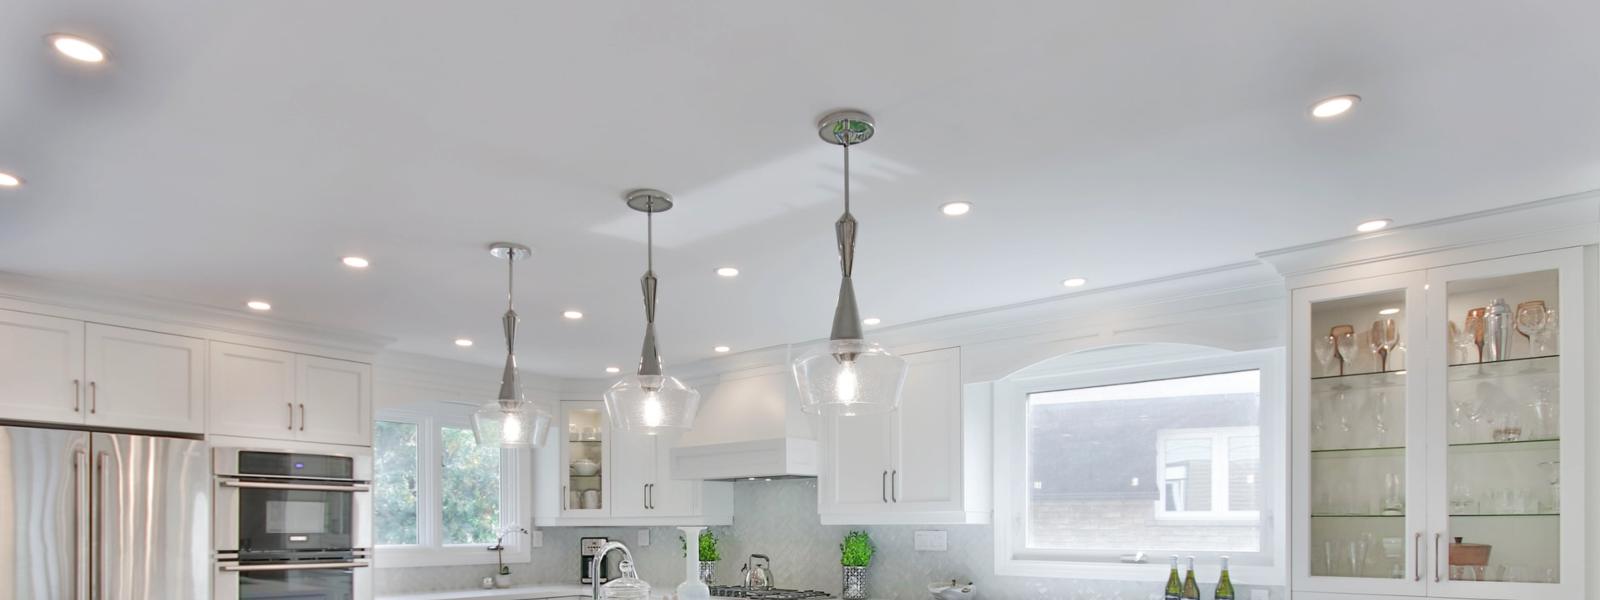 Hanging pendant lights and can lights in kitchen